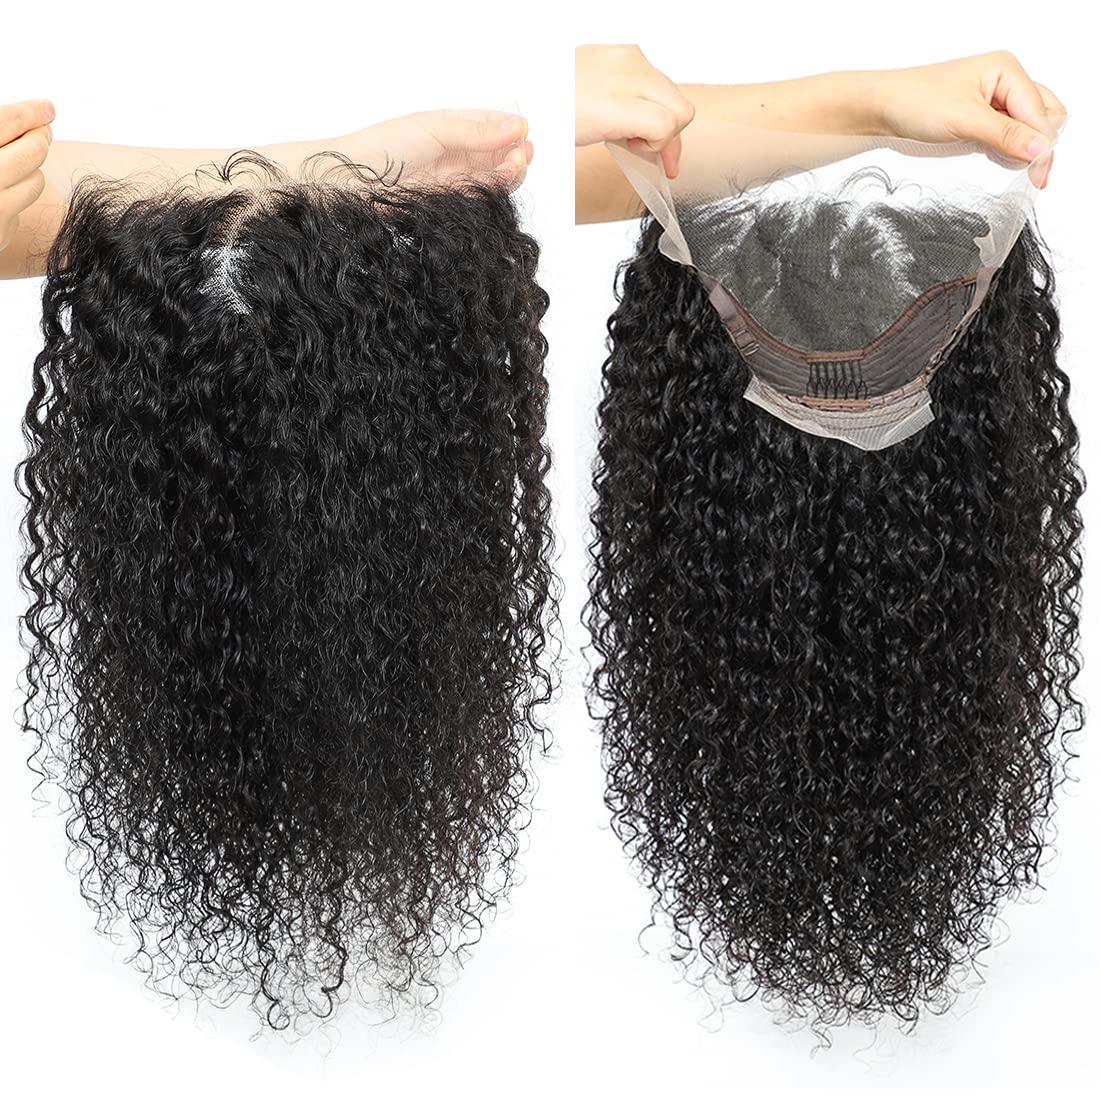 Emilyhair TTNC jerry curly Jerry Curly Lace Closure Wig 13X4 Lace Closure Curly Human Hair Wig 16inch